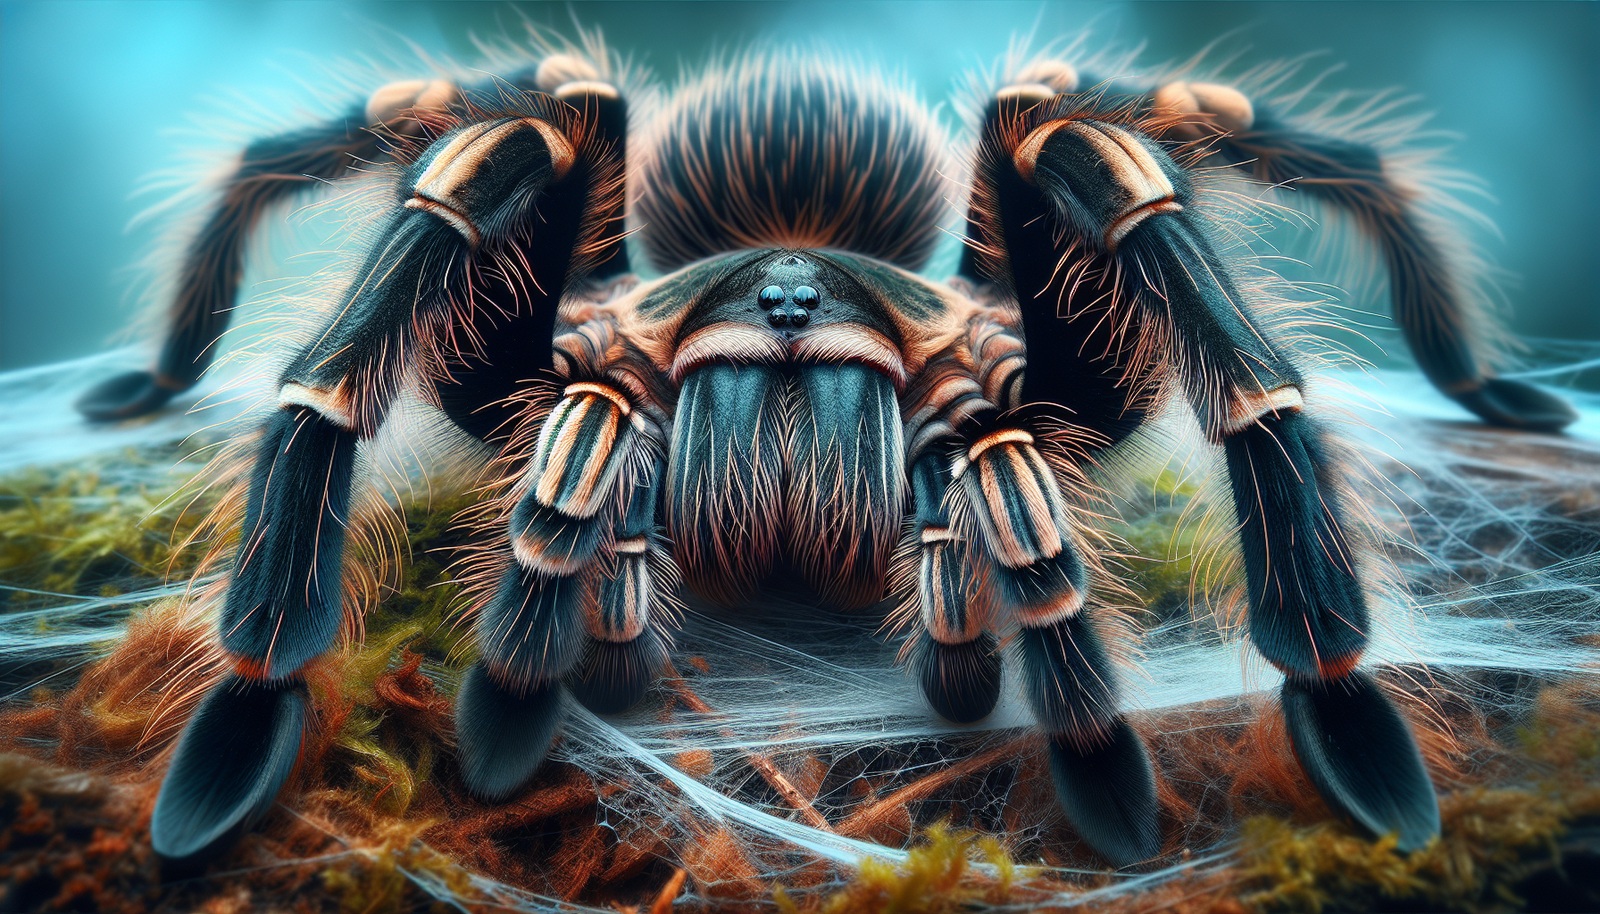 Can Tarantulas Be Threatened By Invasive Species In Their Habitats?